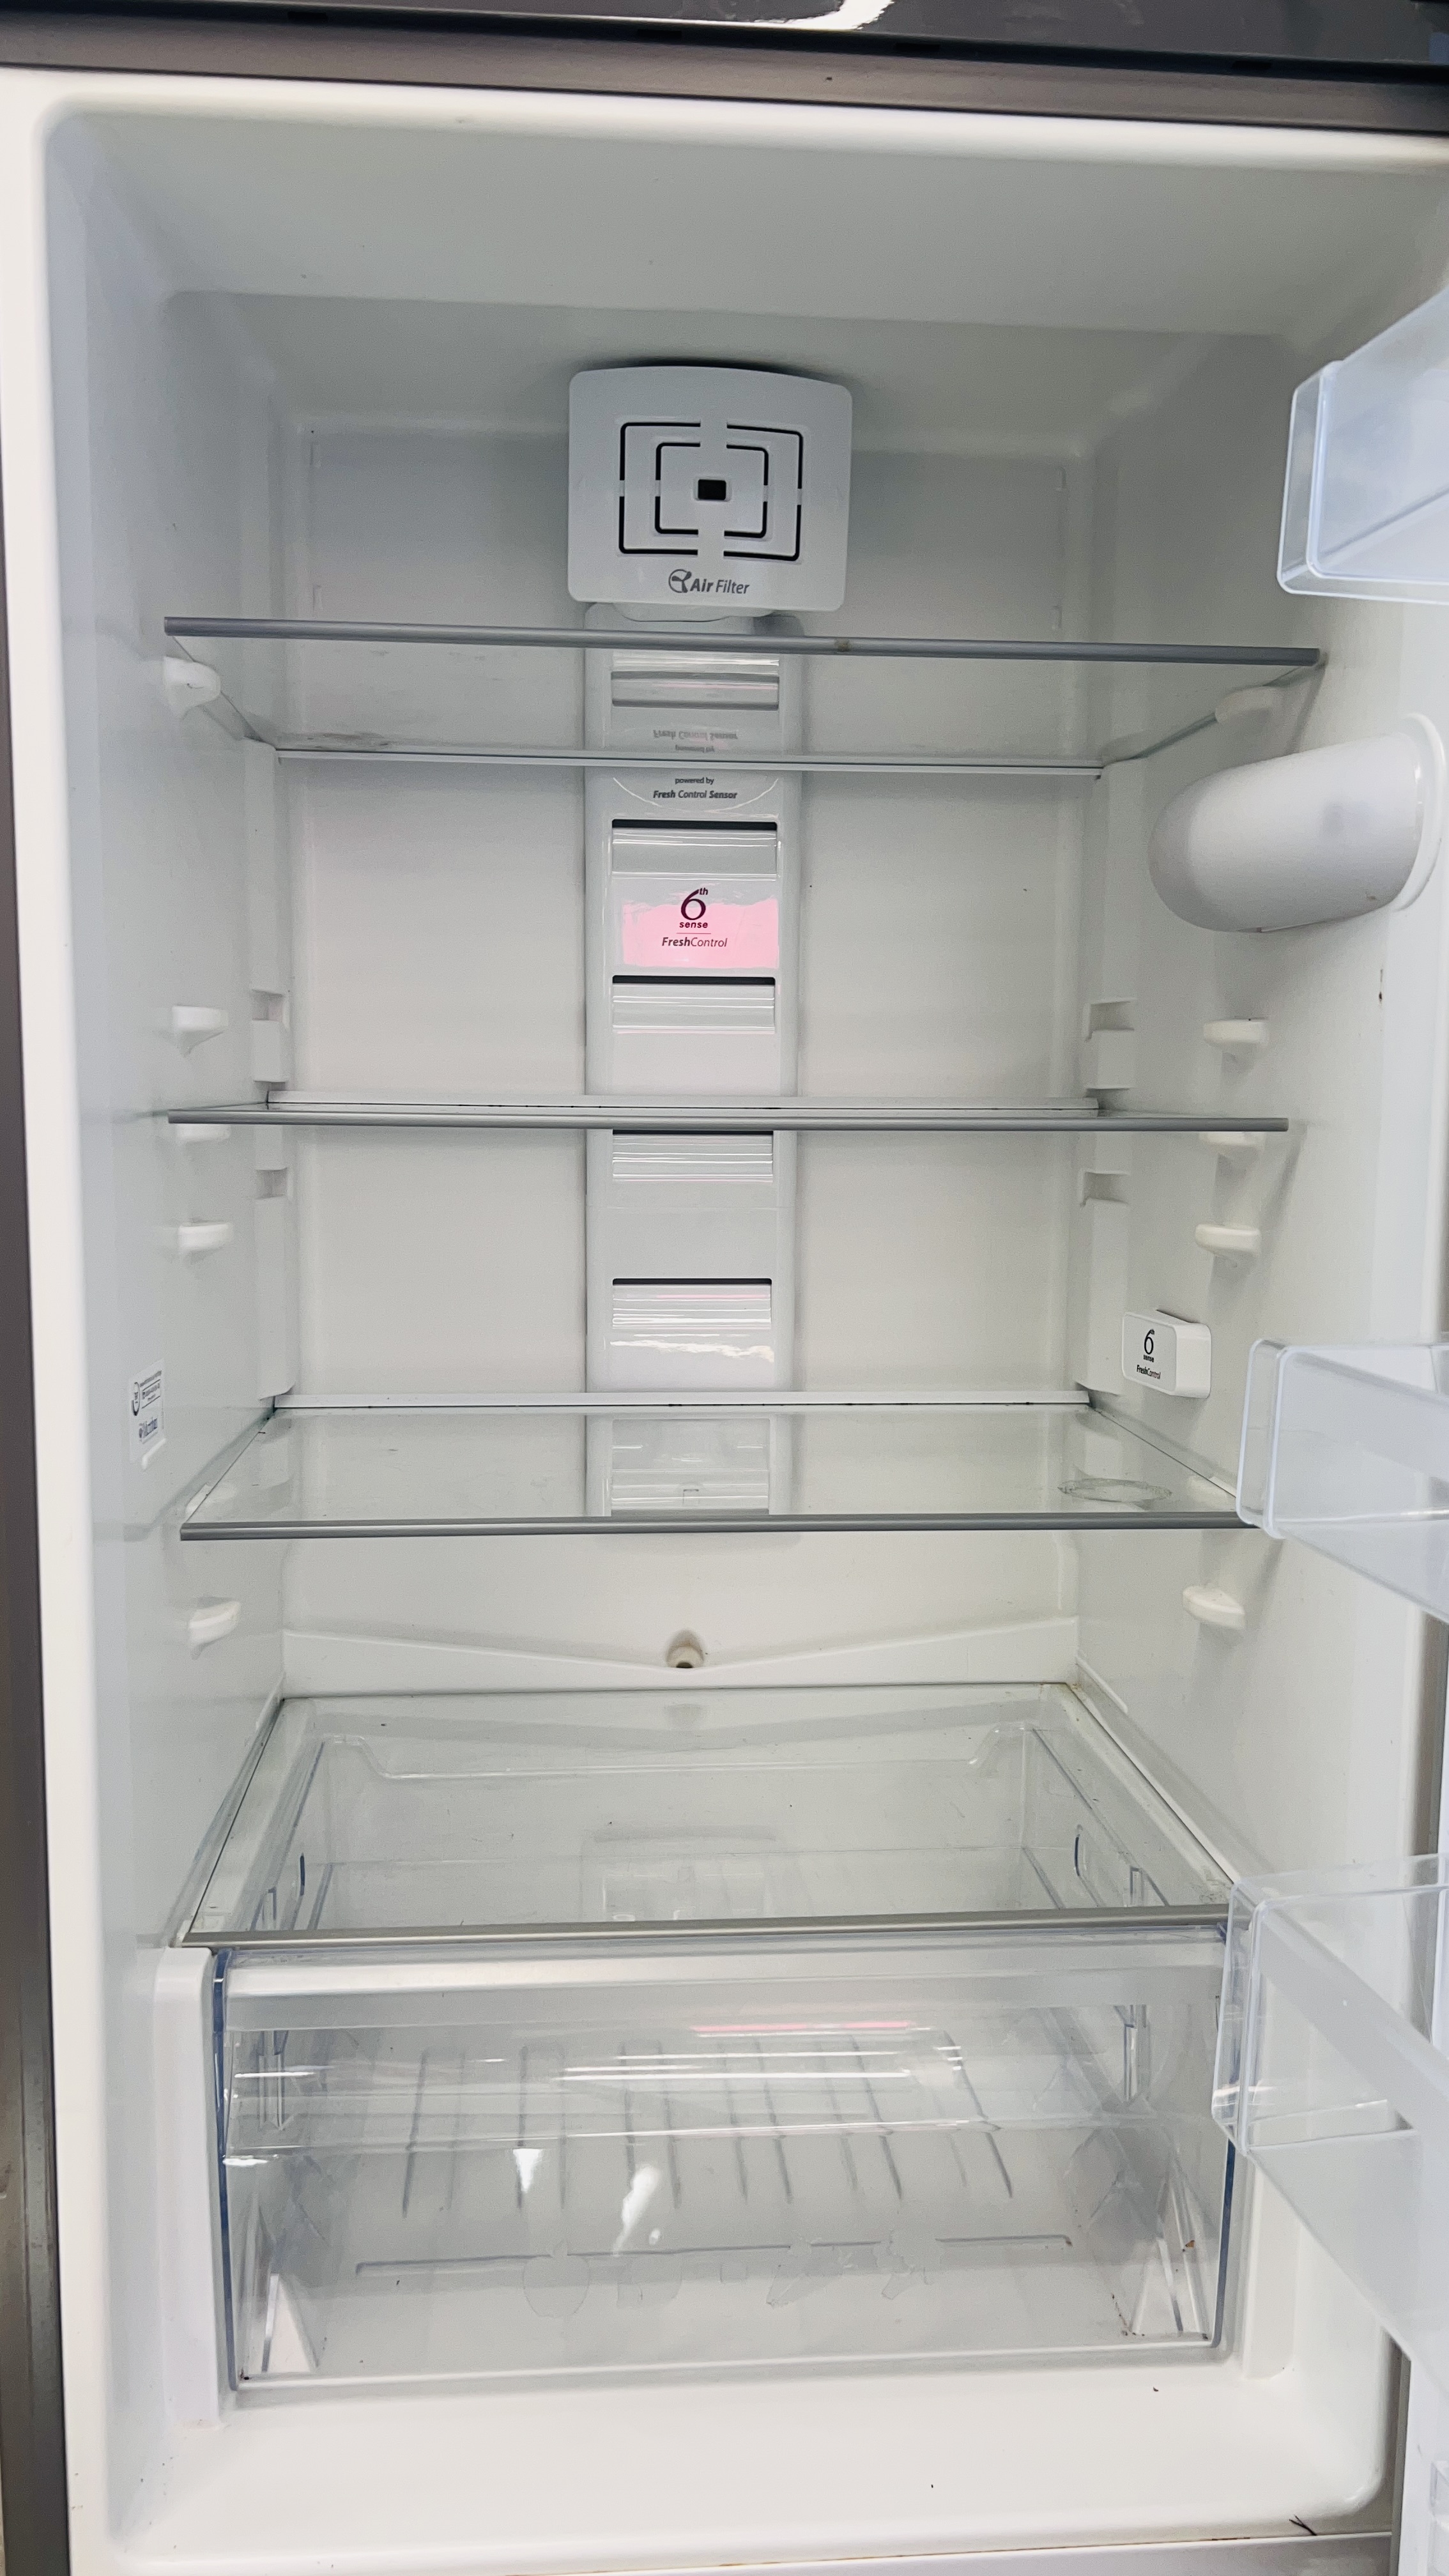 WHIRLPOOL SILVER FINISH A+++ CLASS NO FROST FRIDGE FREEZER WITH 6TH SENSE FRESH CONTROL - SOLD AS - Image 8 of 13